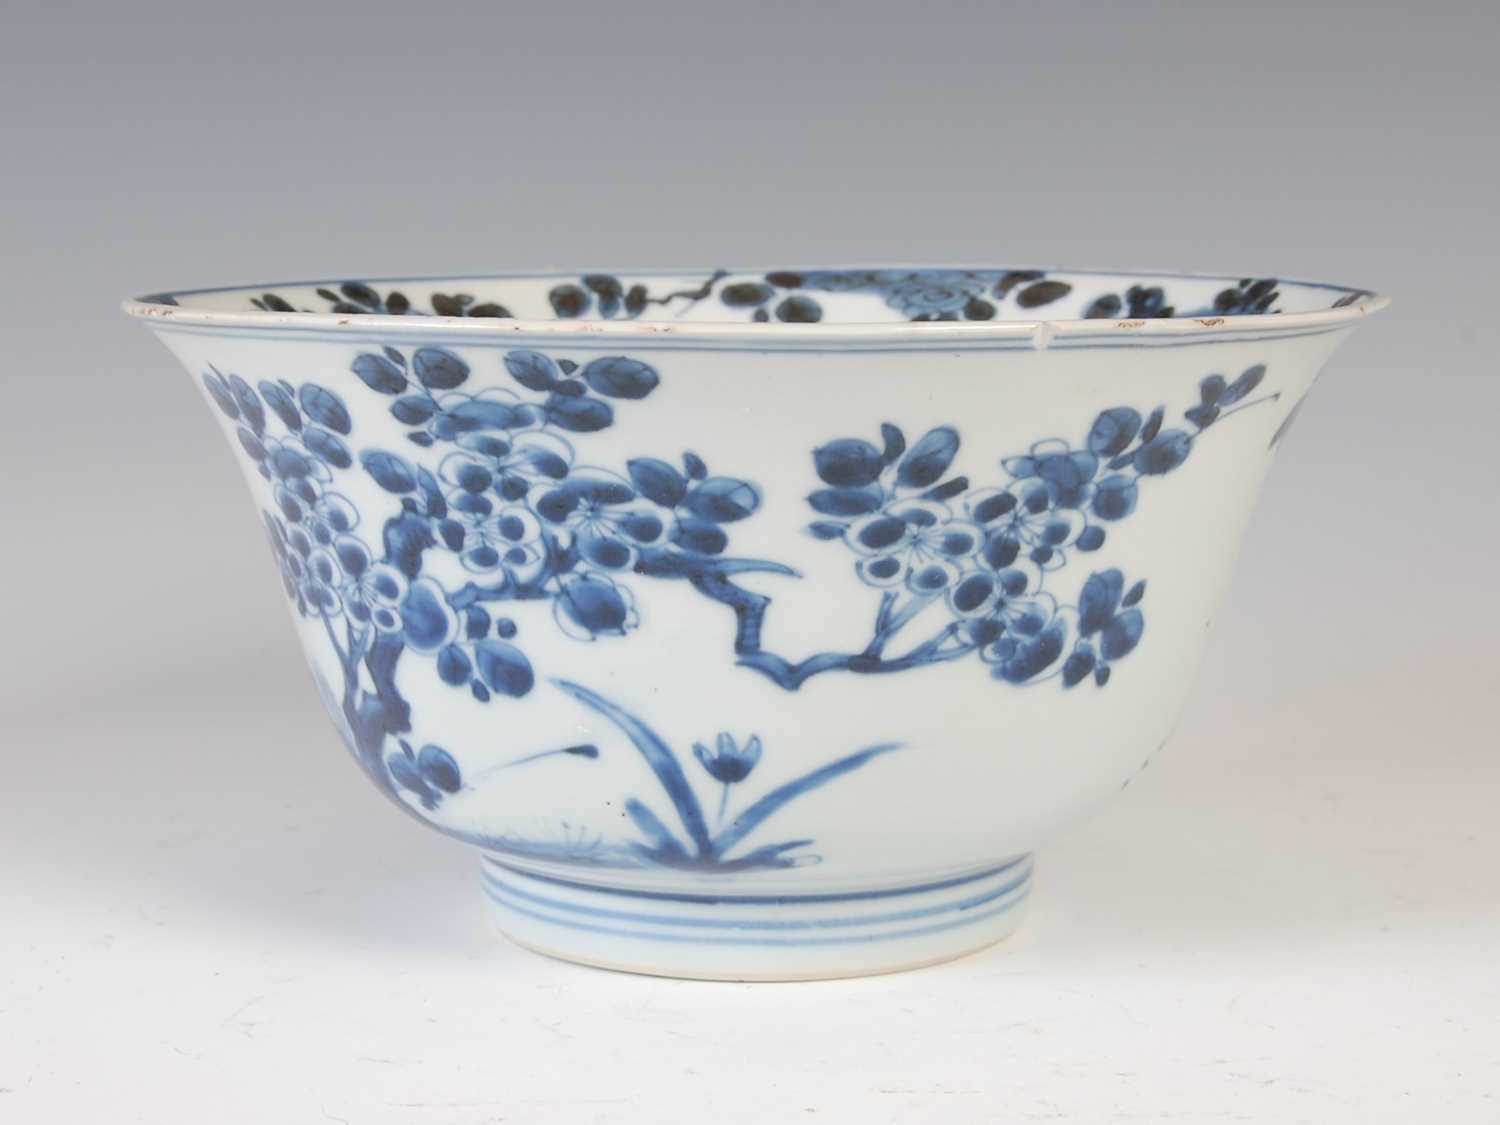 A Chinese porcelain blue and white bowl, Qing Dynasty, the exterior decorated with chrysanthemum, - Image 2 of 11